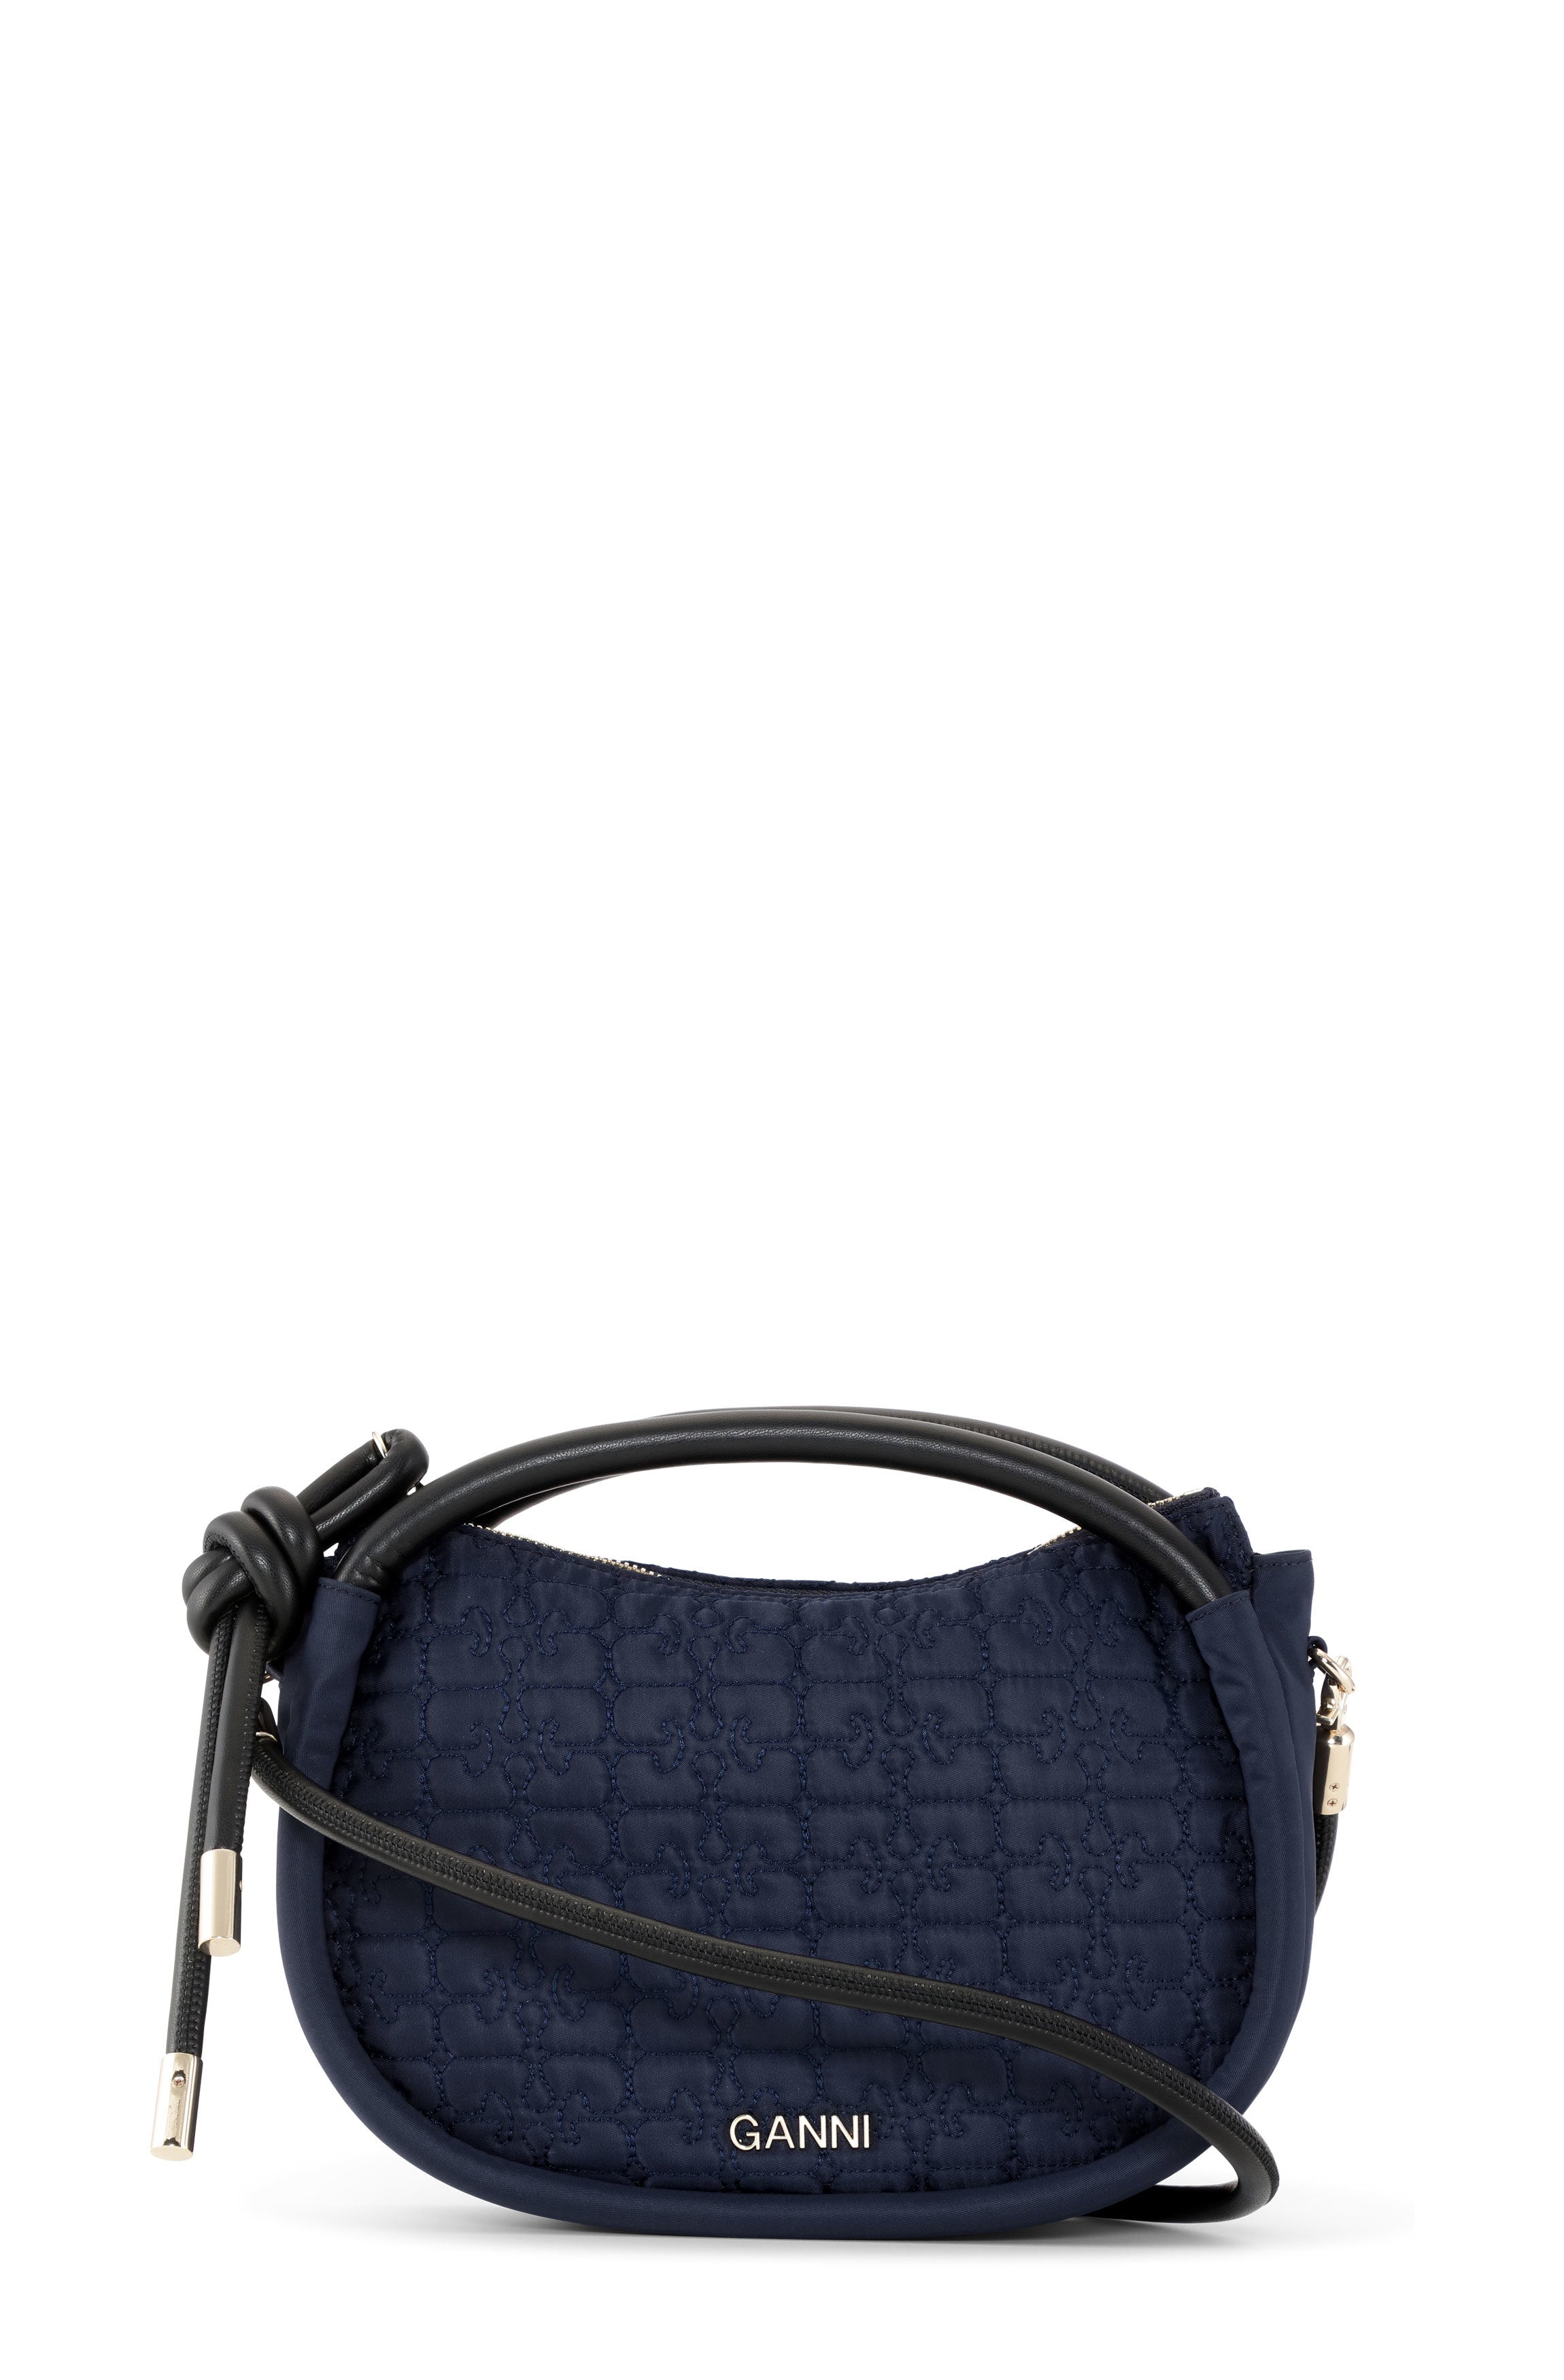 Michael Kors Navy Blue and White Leather Belt Signature Fanny Pack